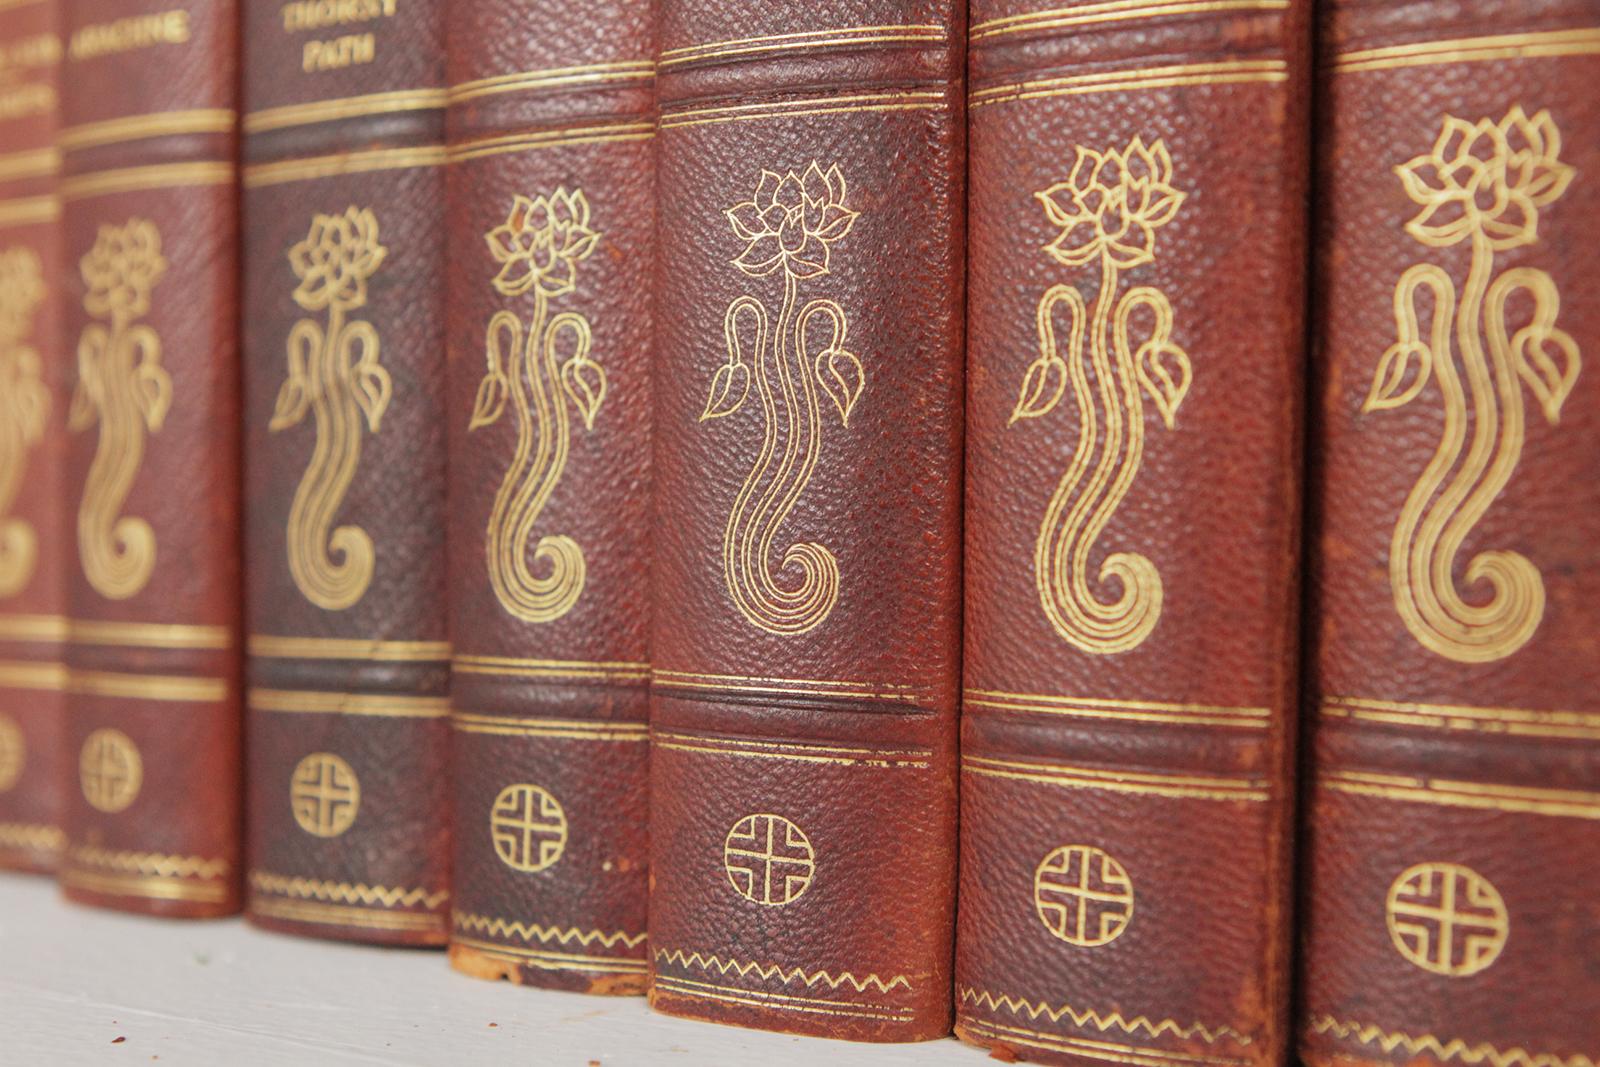 Set of 13 leather bound books, the Works of Georg Ebers. The red leather bindings with handmade marbleized paper on the covers. There is some wear on the edges with one top on one book with a loss. Published, 1889, D. Appleton and Company, New York